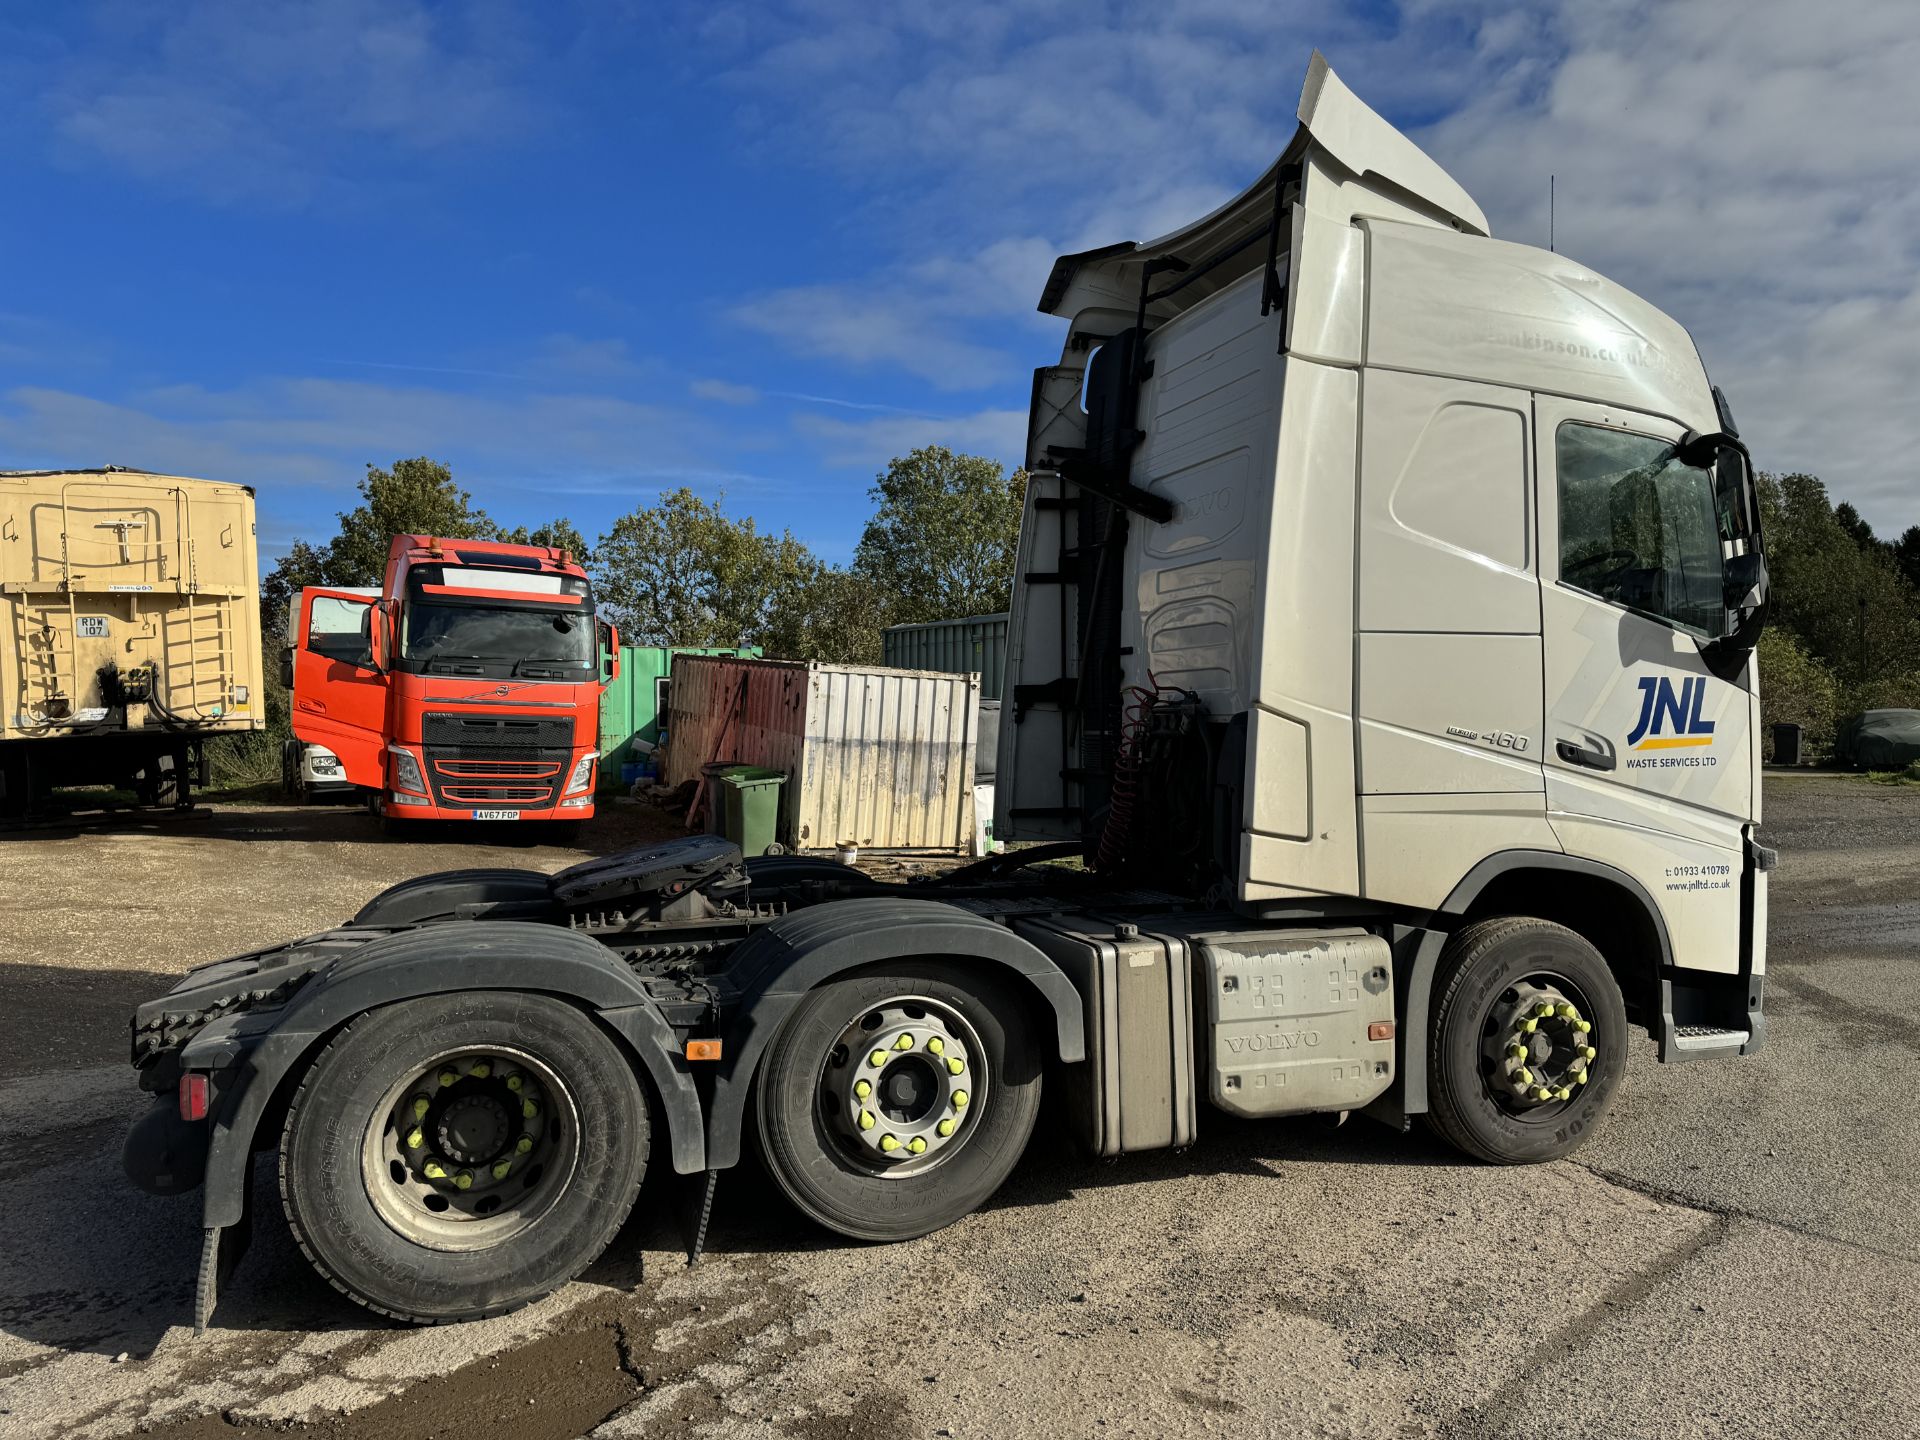 2016 - Volvo FH460 6 x 2 Euro 6 Mid Lift Tractor Unit - Image 10 of 47